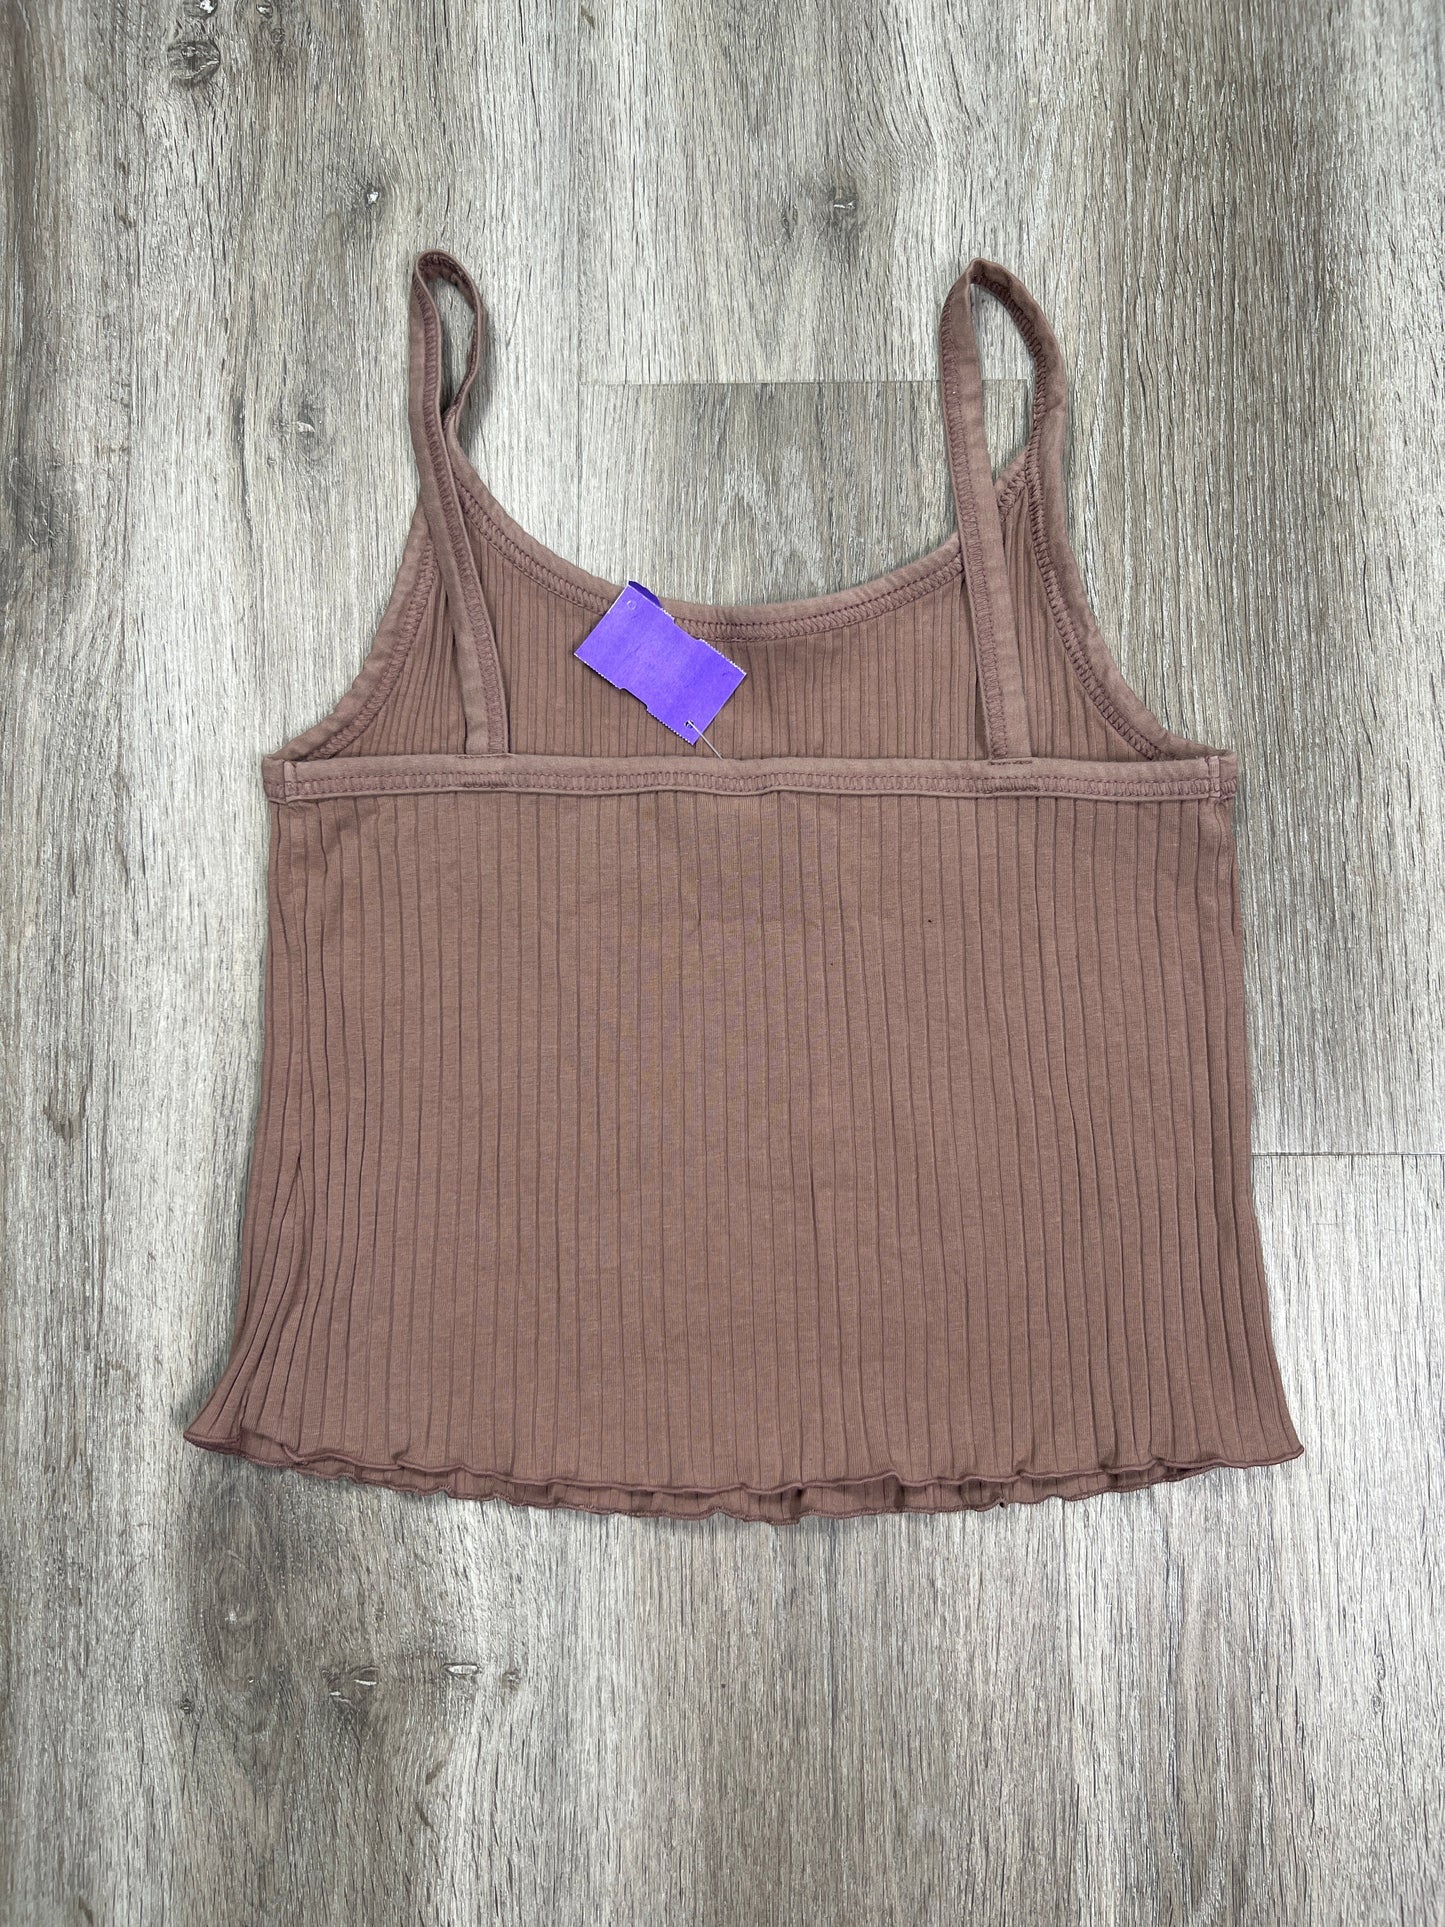 Brown Tank Top Old Navy, Size L